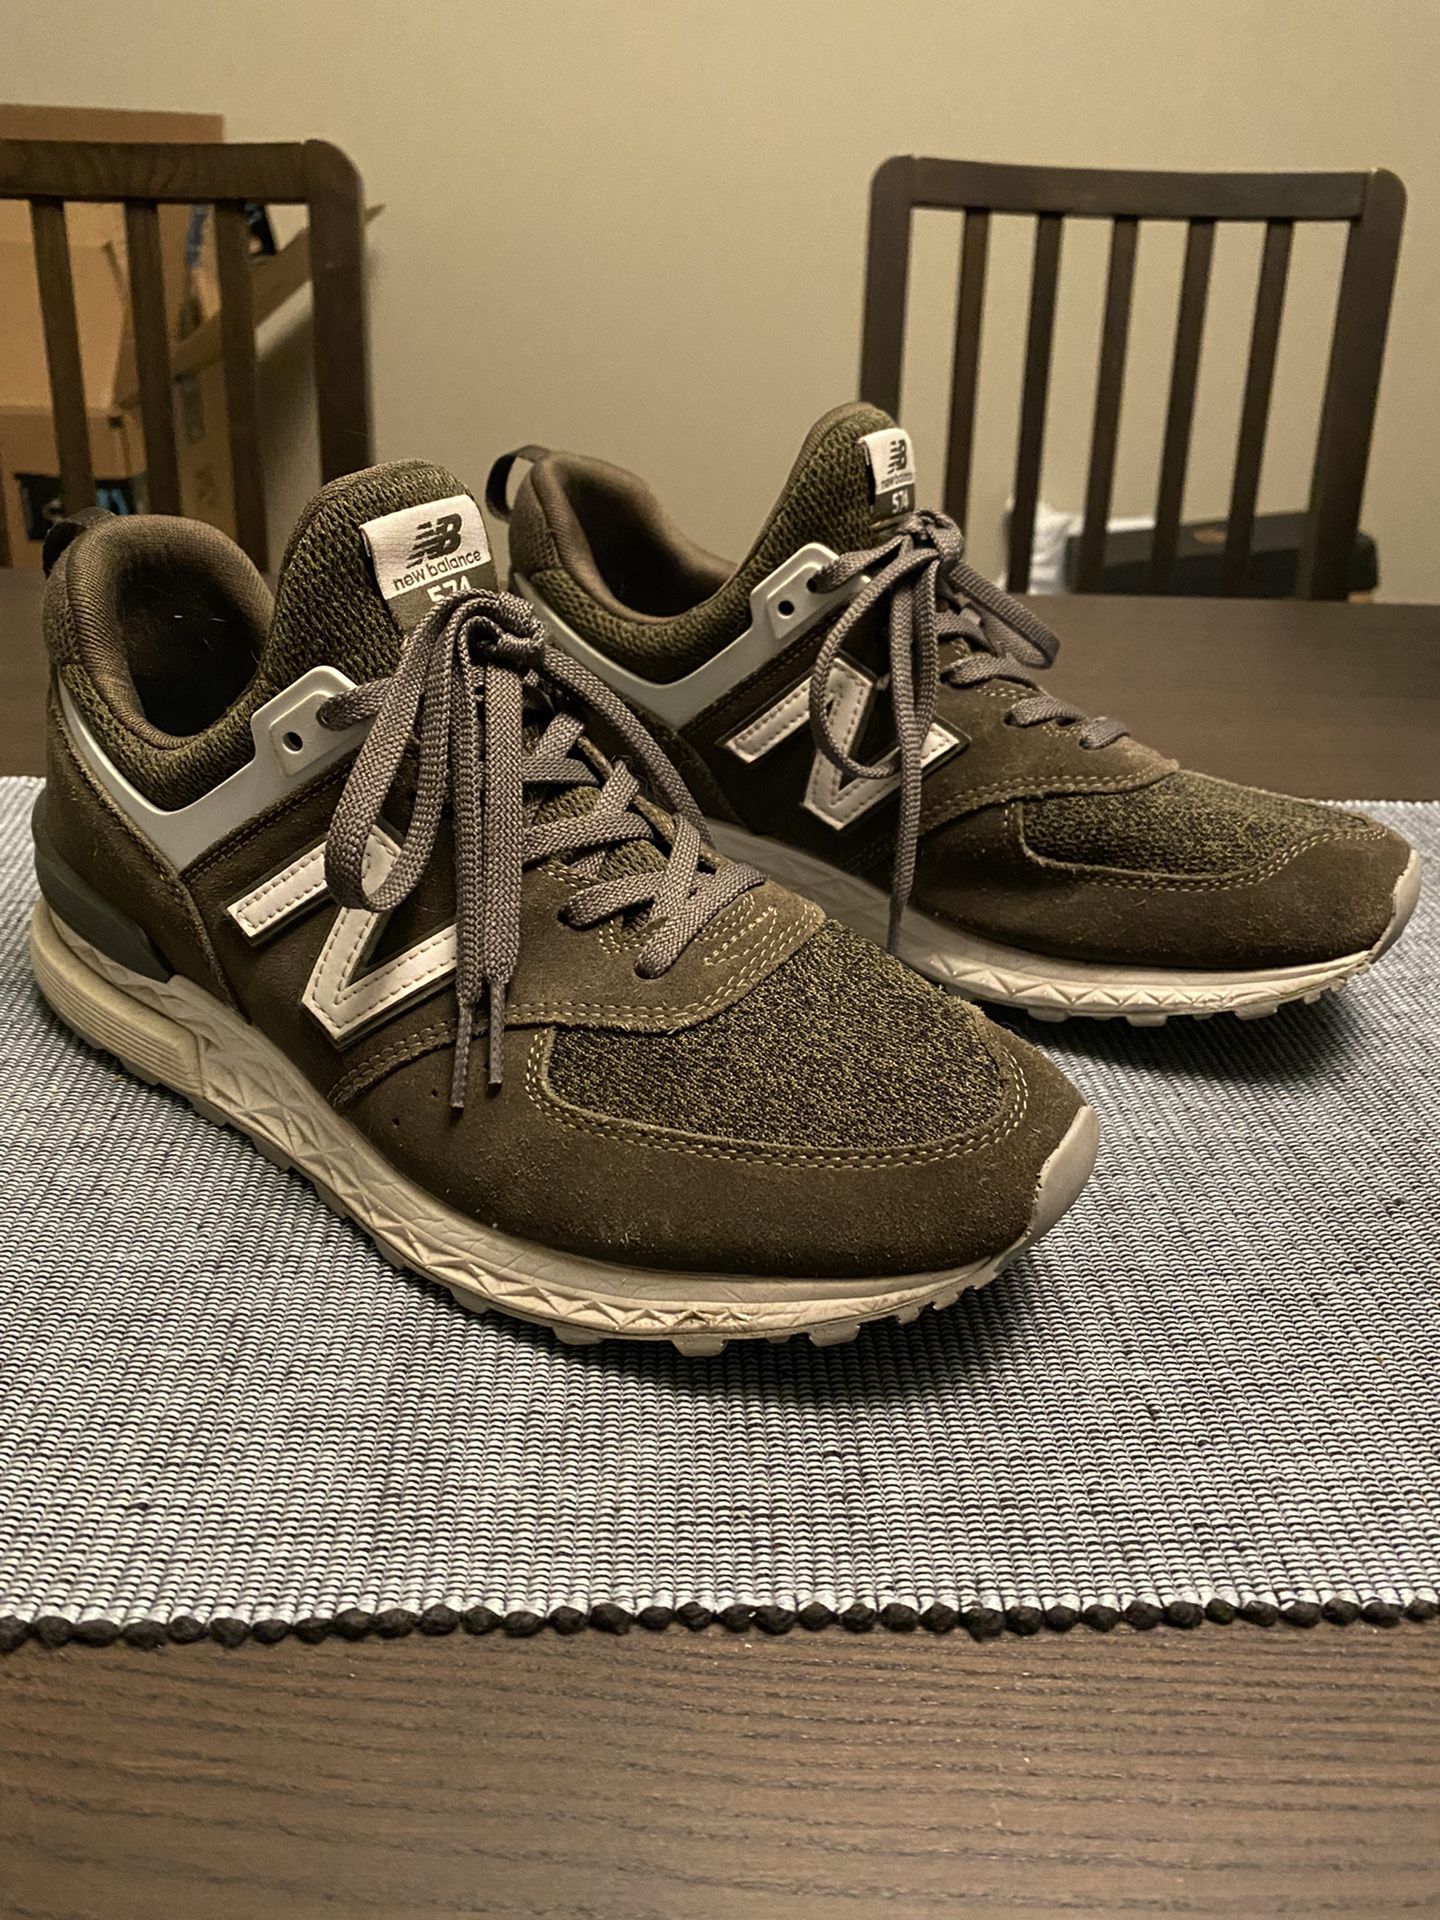 Sport Size 10 for Sale in WA - OfferUp